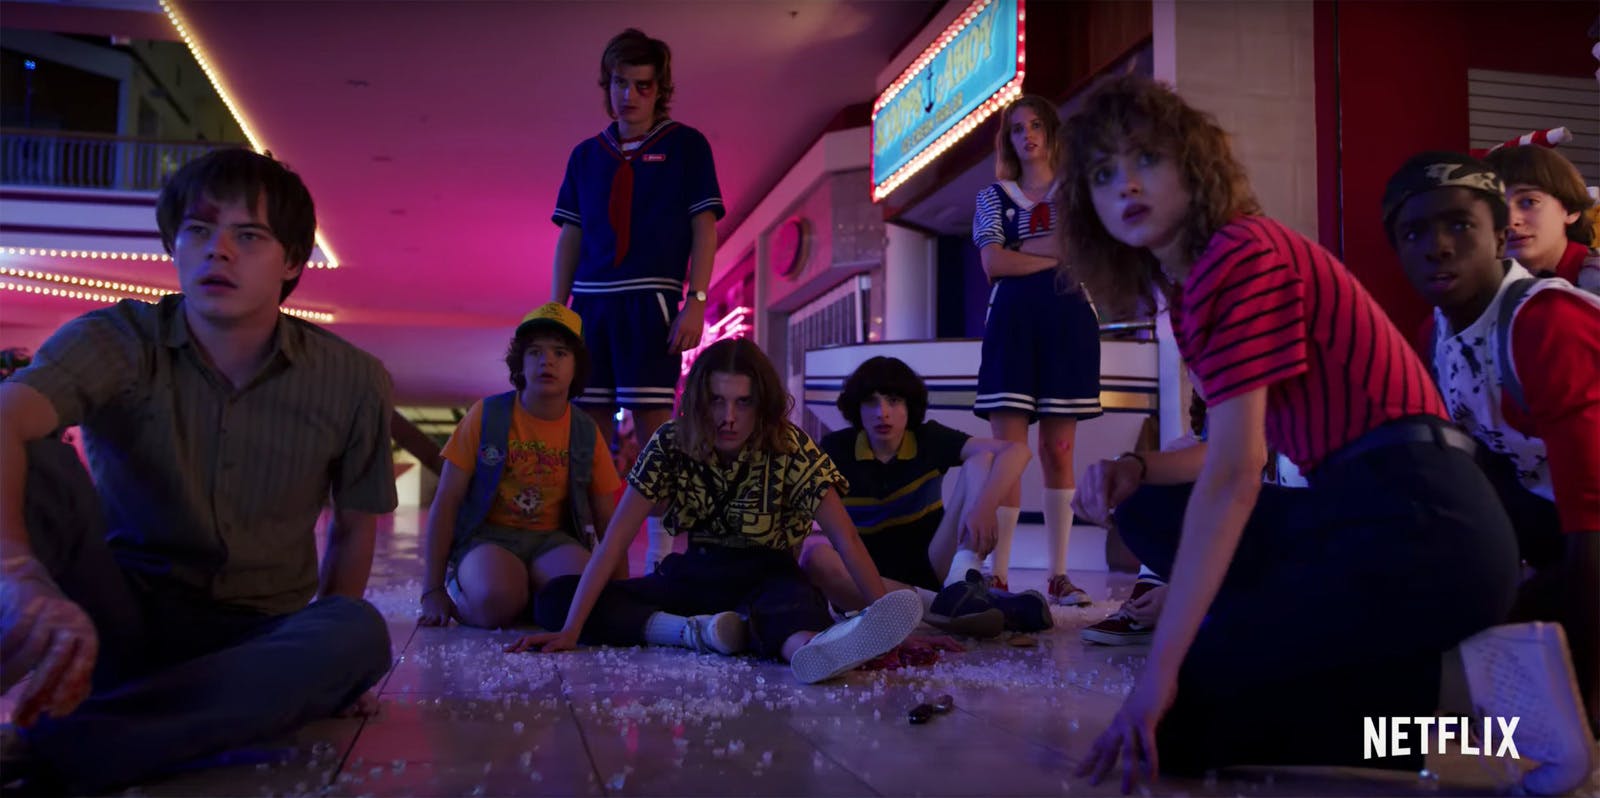 Watch The New Trailer For Stranger Things 3